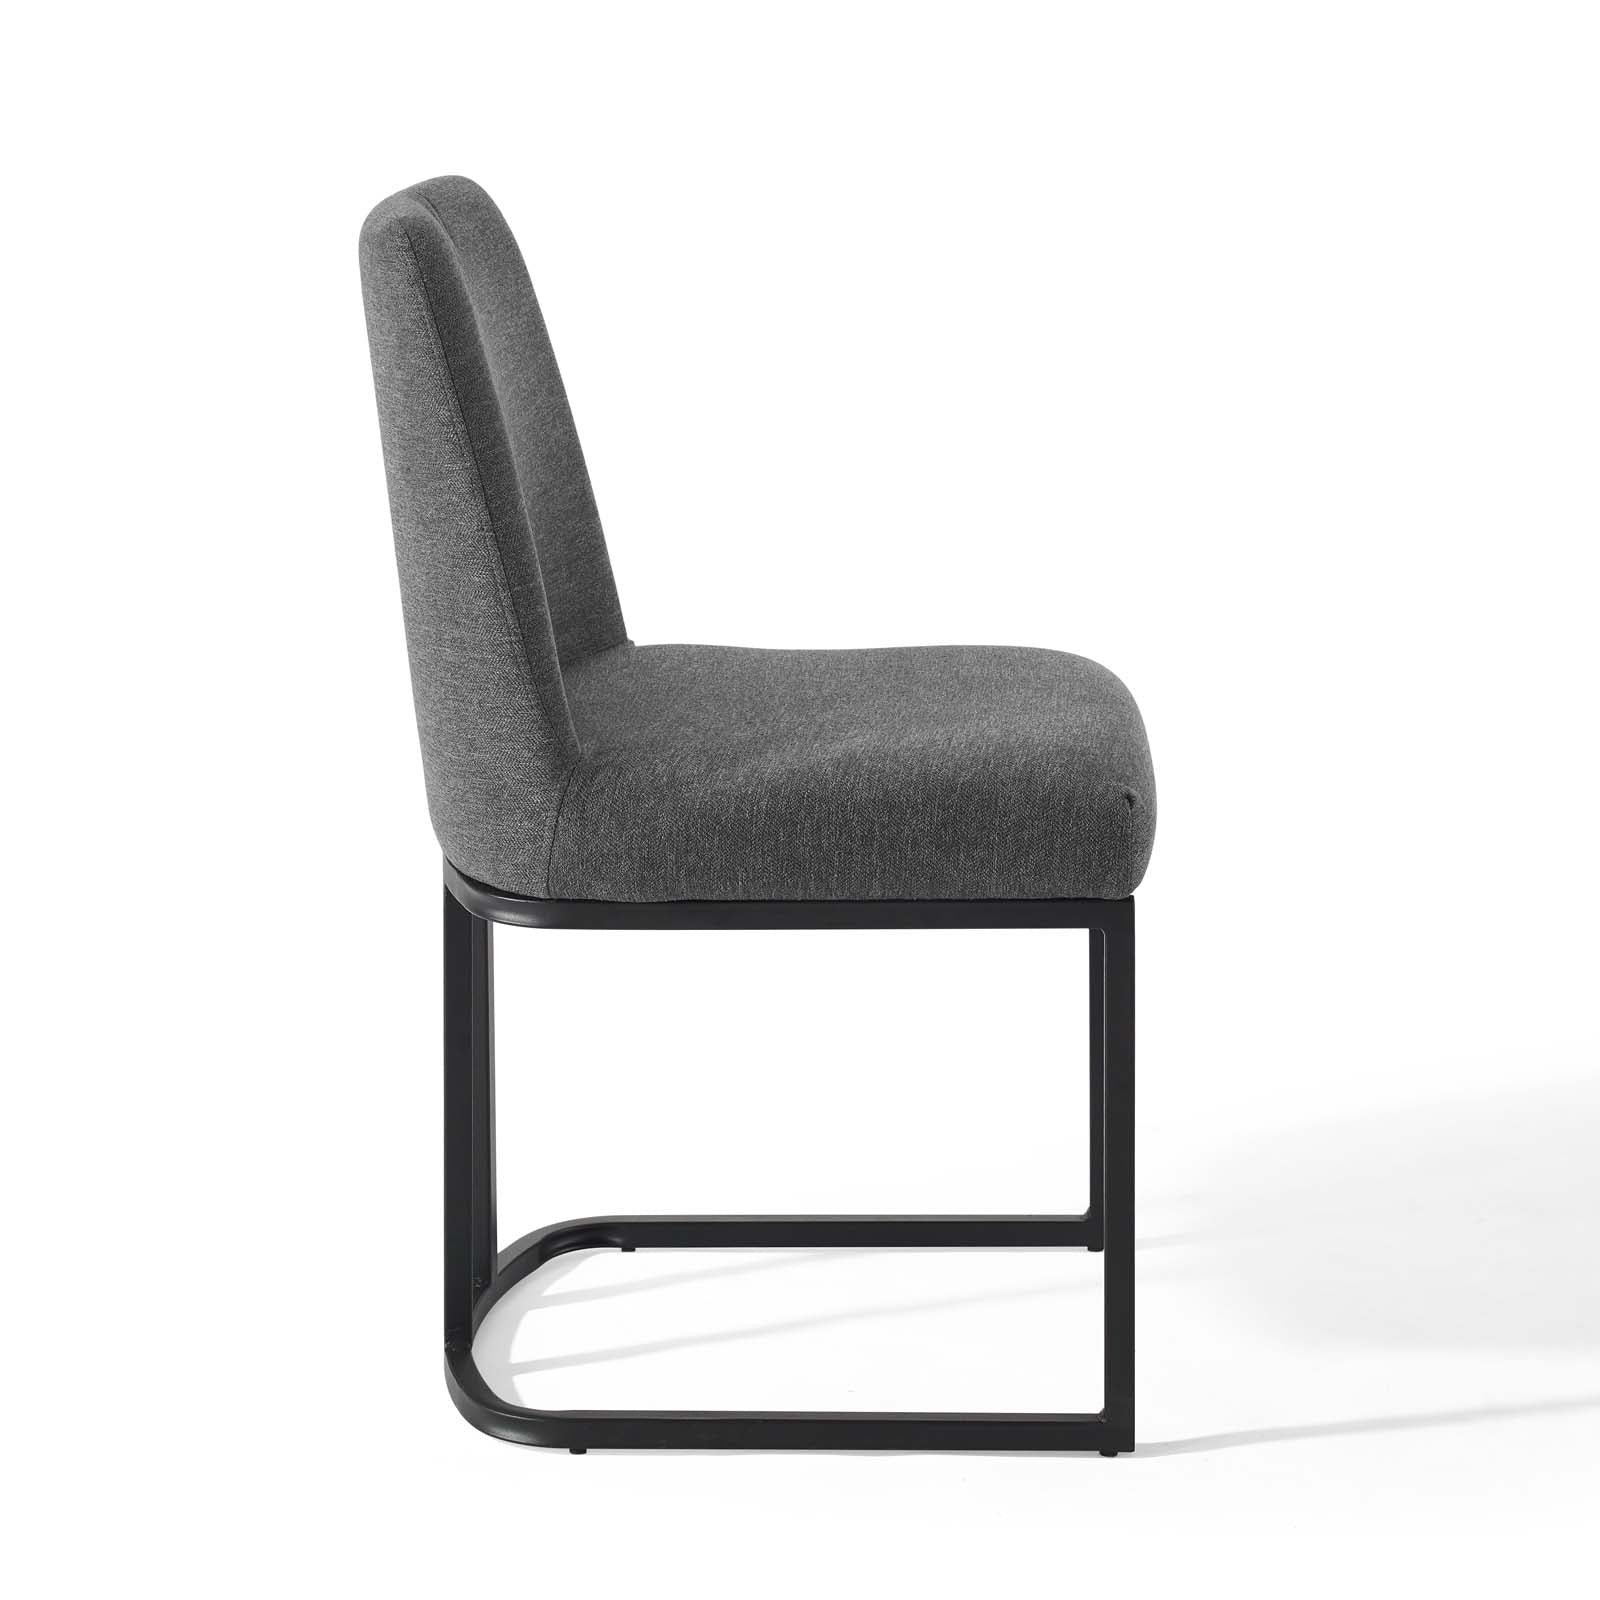 Modway Dining Chairs - Amplify Sled Base Upholstered Fabric Dining Side Chair Black Charcoal